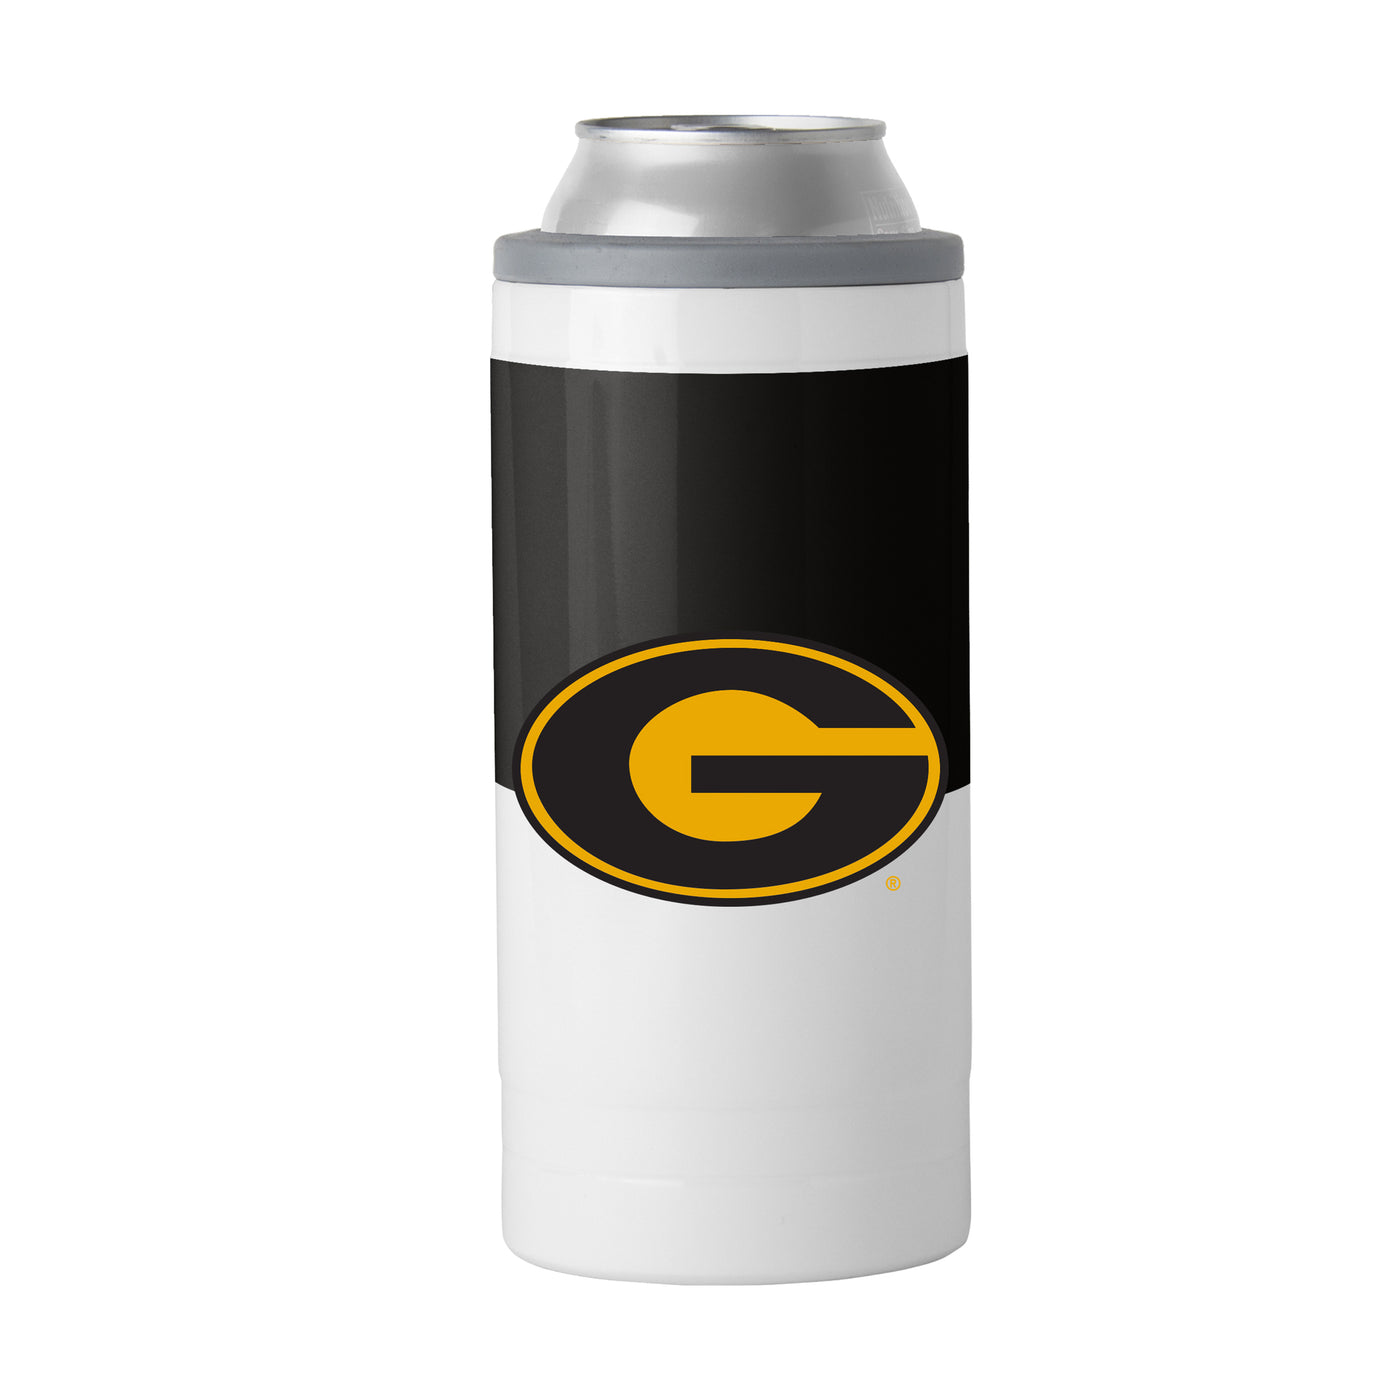 Grambling State Colorblock 12oz Slim Can Coolie